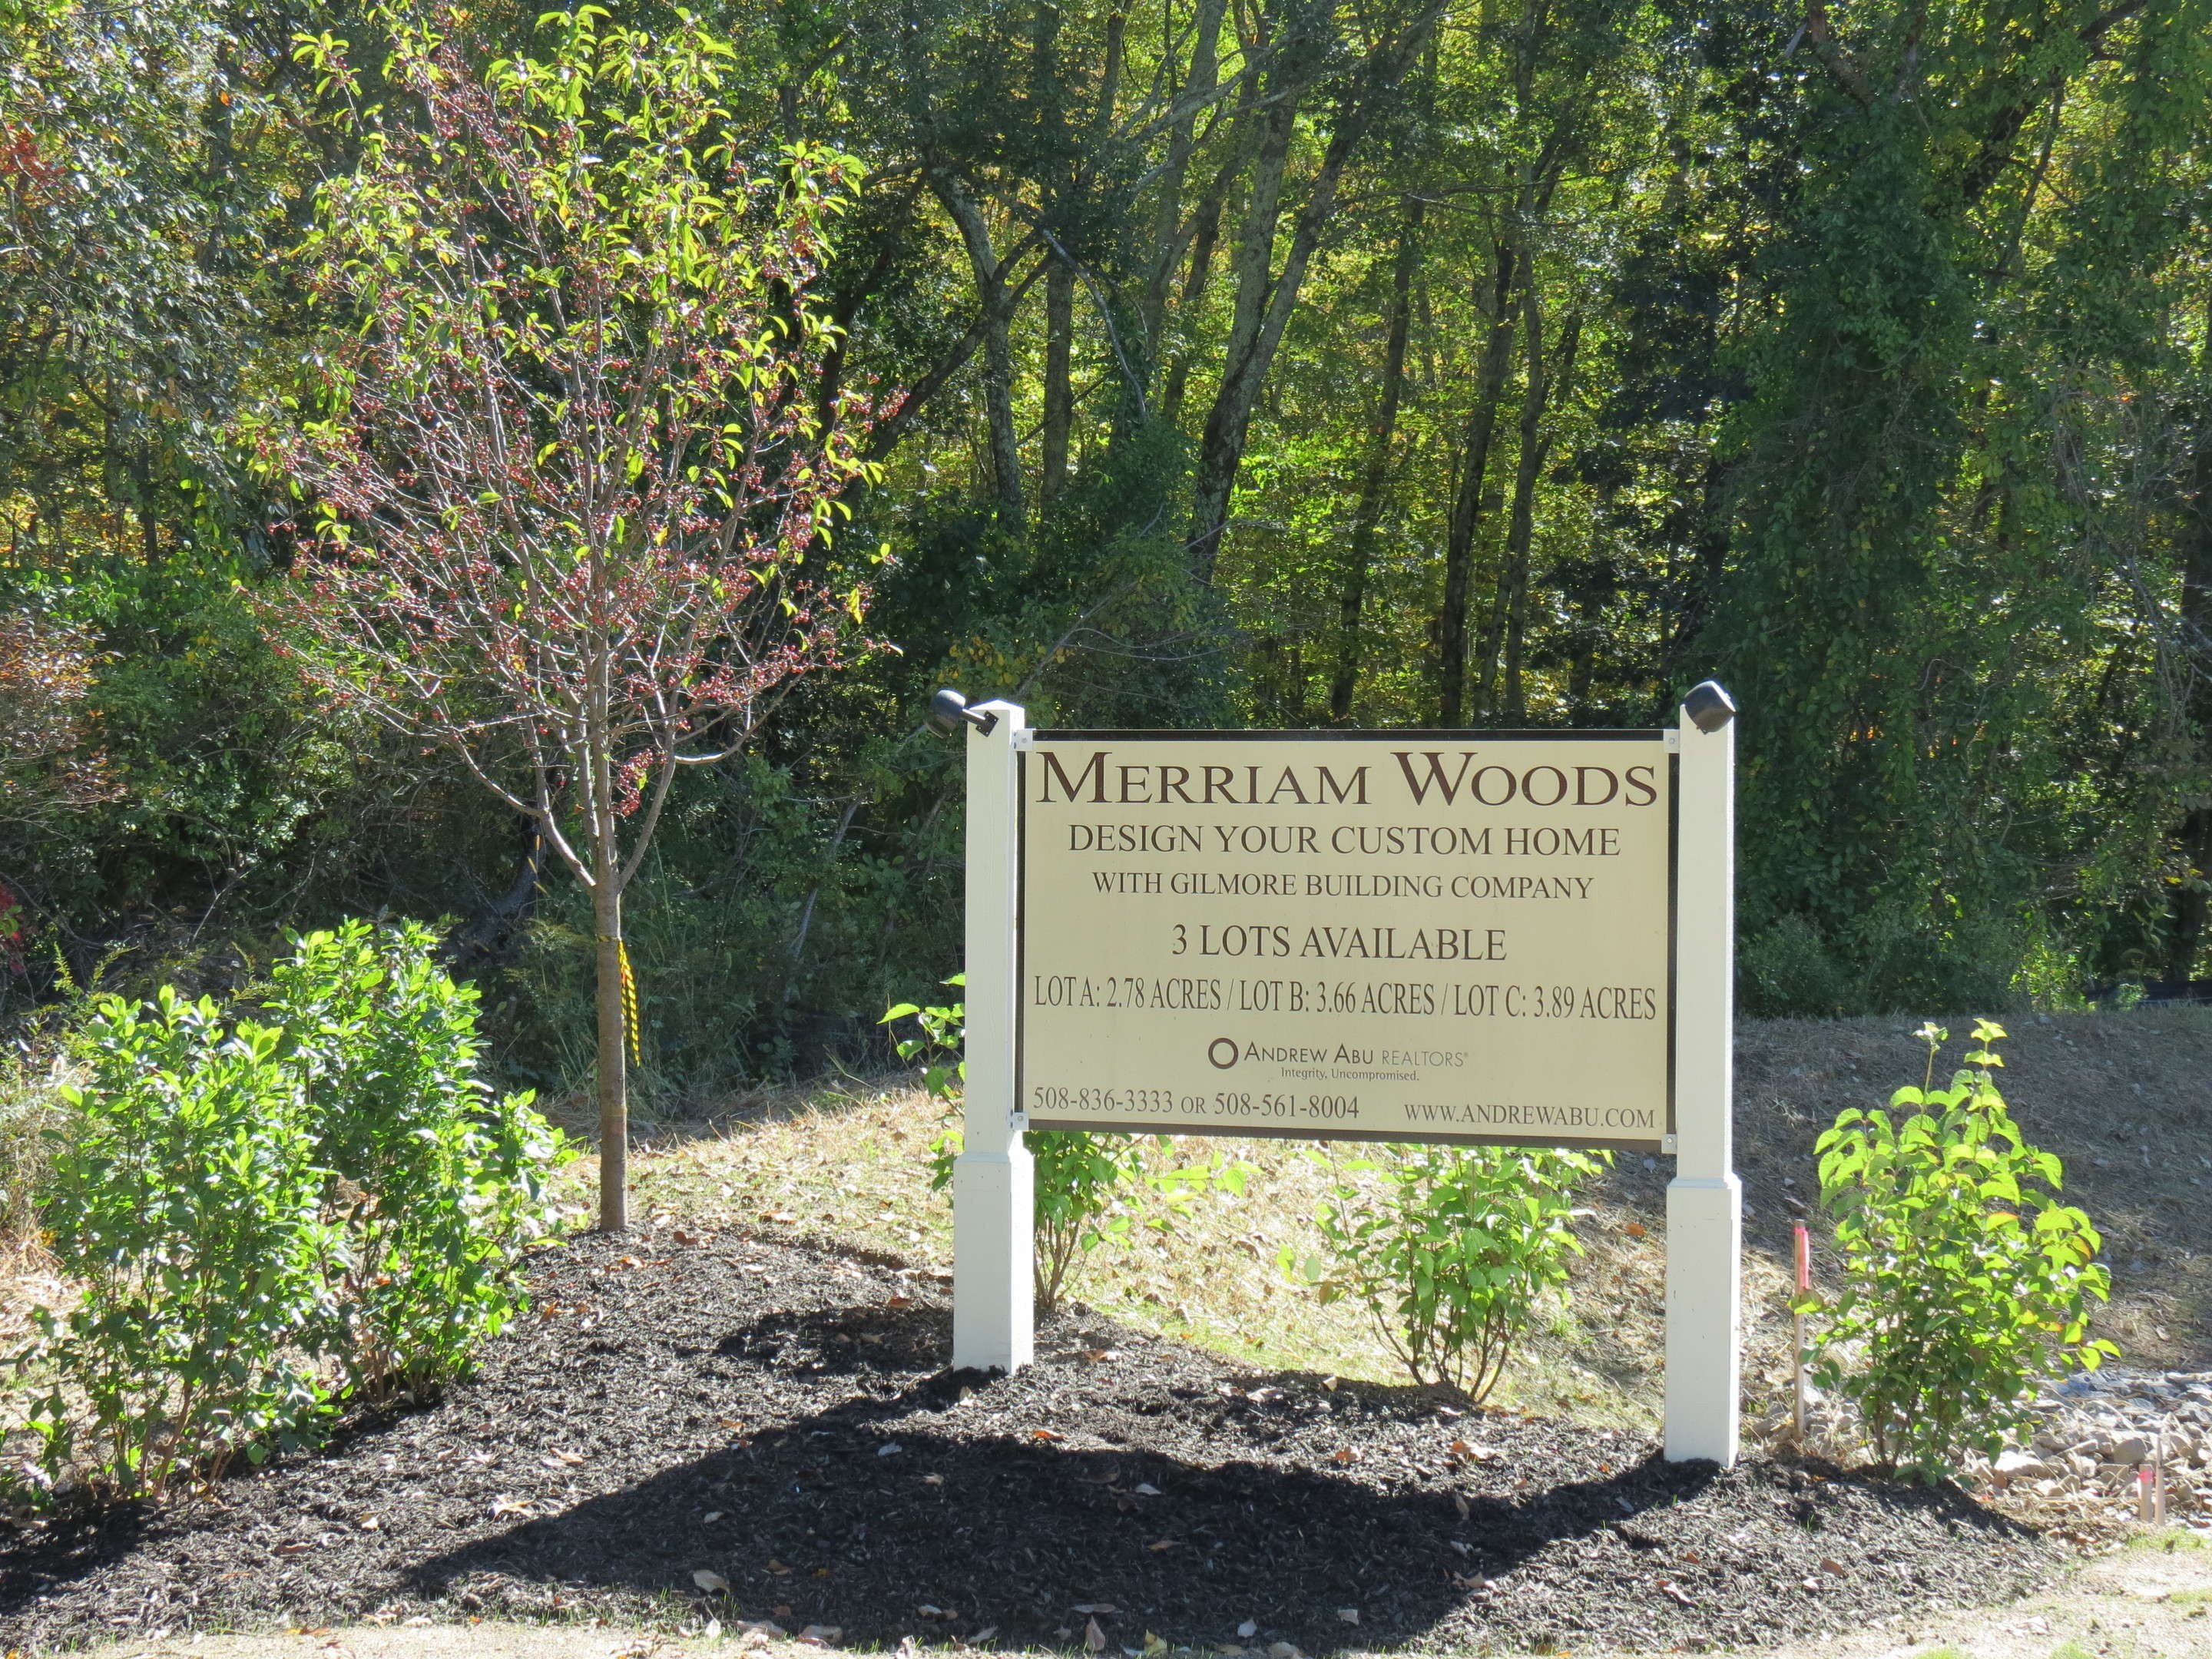 Merriam Woods Grafton MA welcome sign